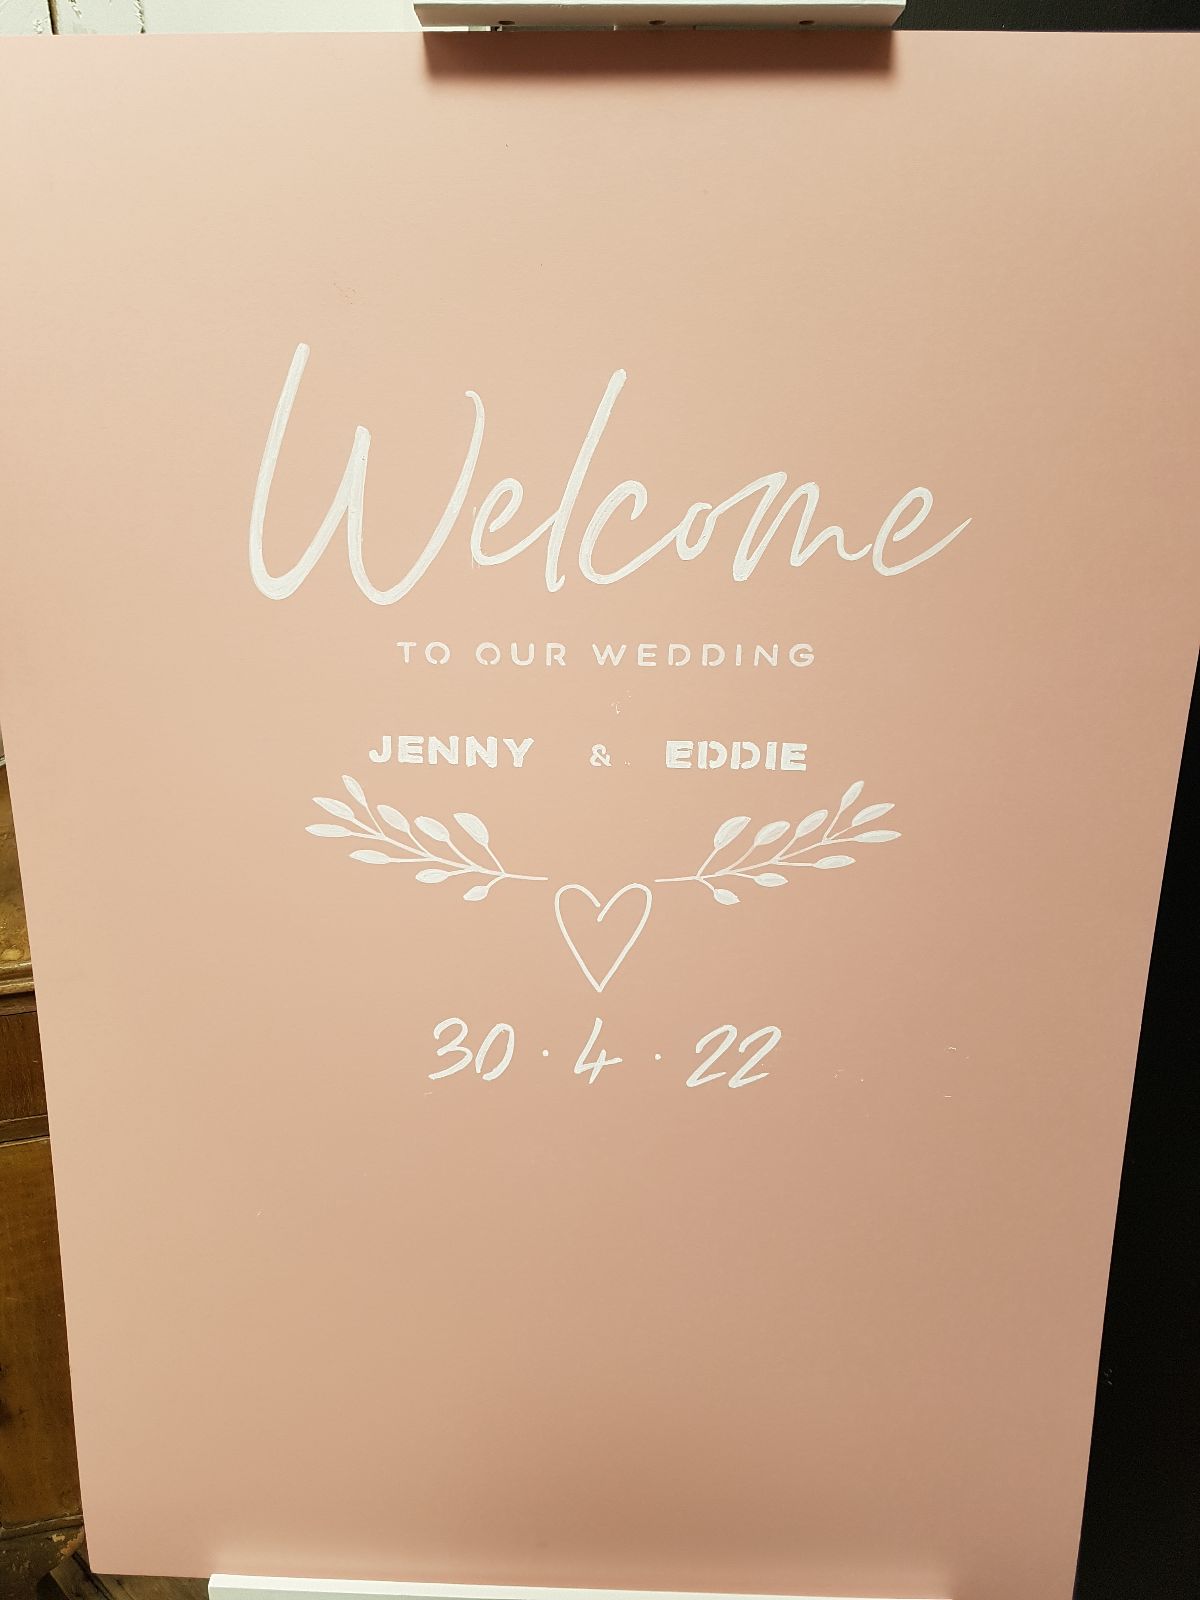 Real Wedding Image for Jenny